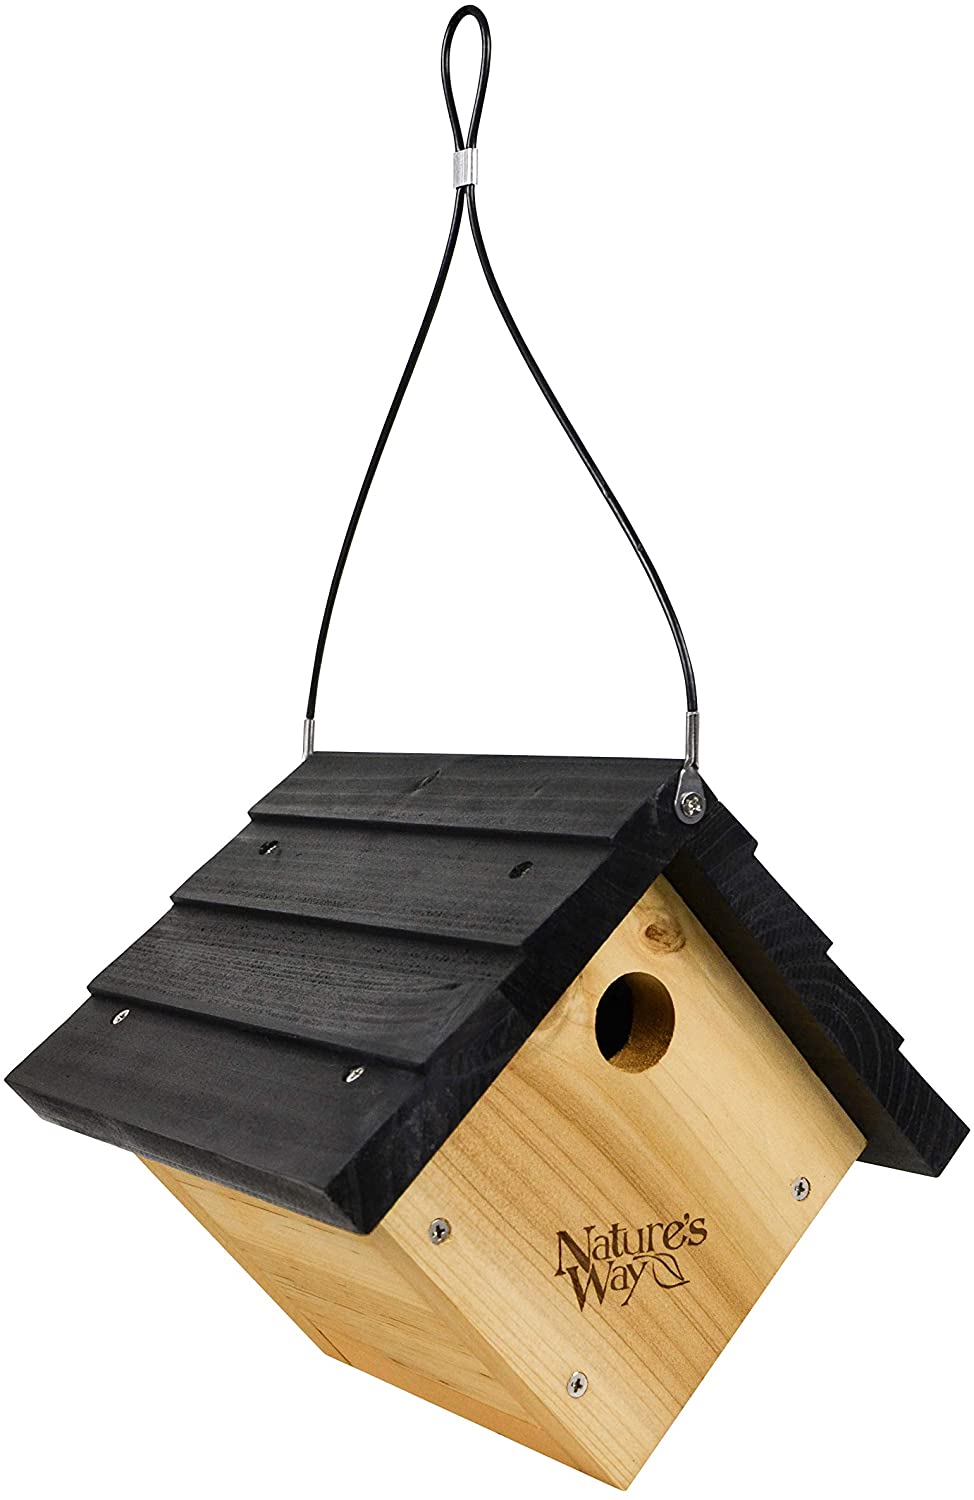 How to choose right birdhouse to attract nesting birds